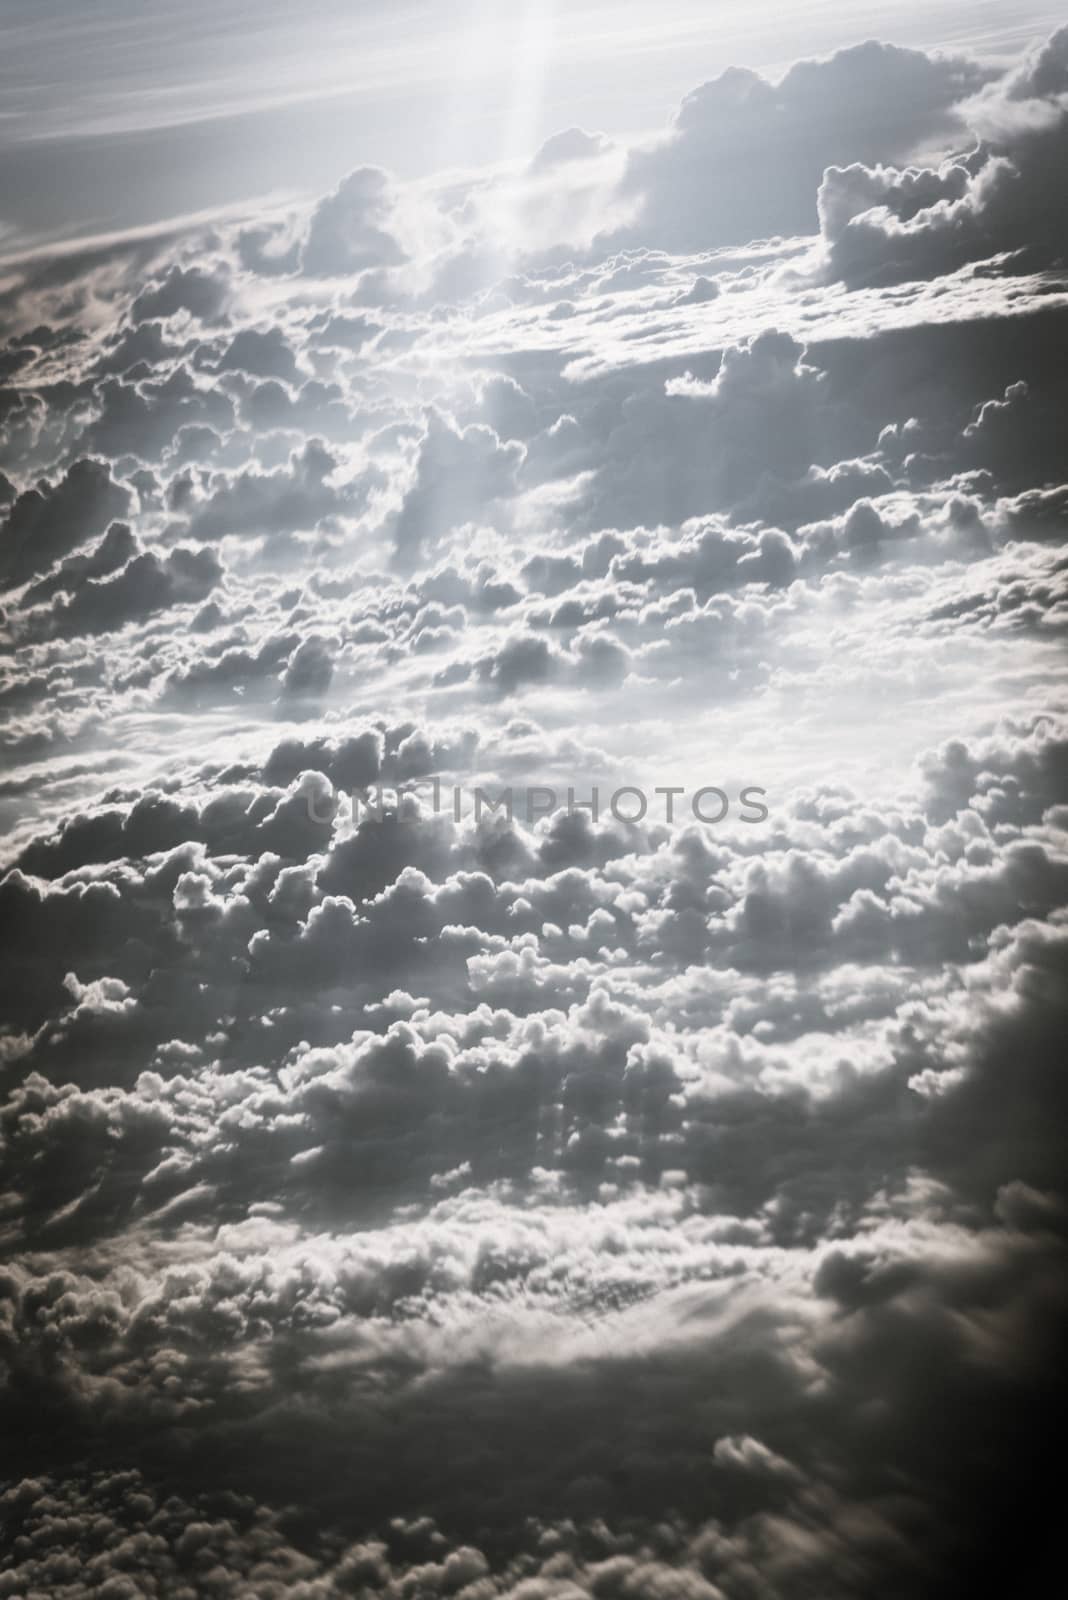 Vintage tone beautiful and unusual Altocumulus or Cirrocumulus cloud formation seen from airplane window at sunrise. Skyline view above the clouds from the air